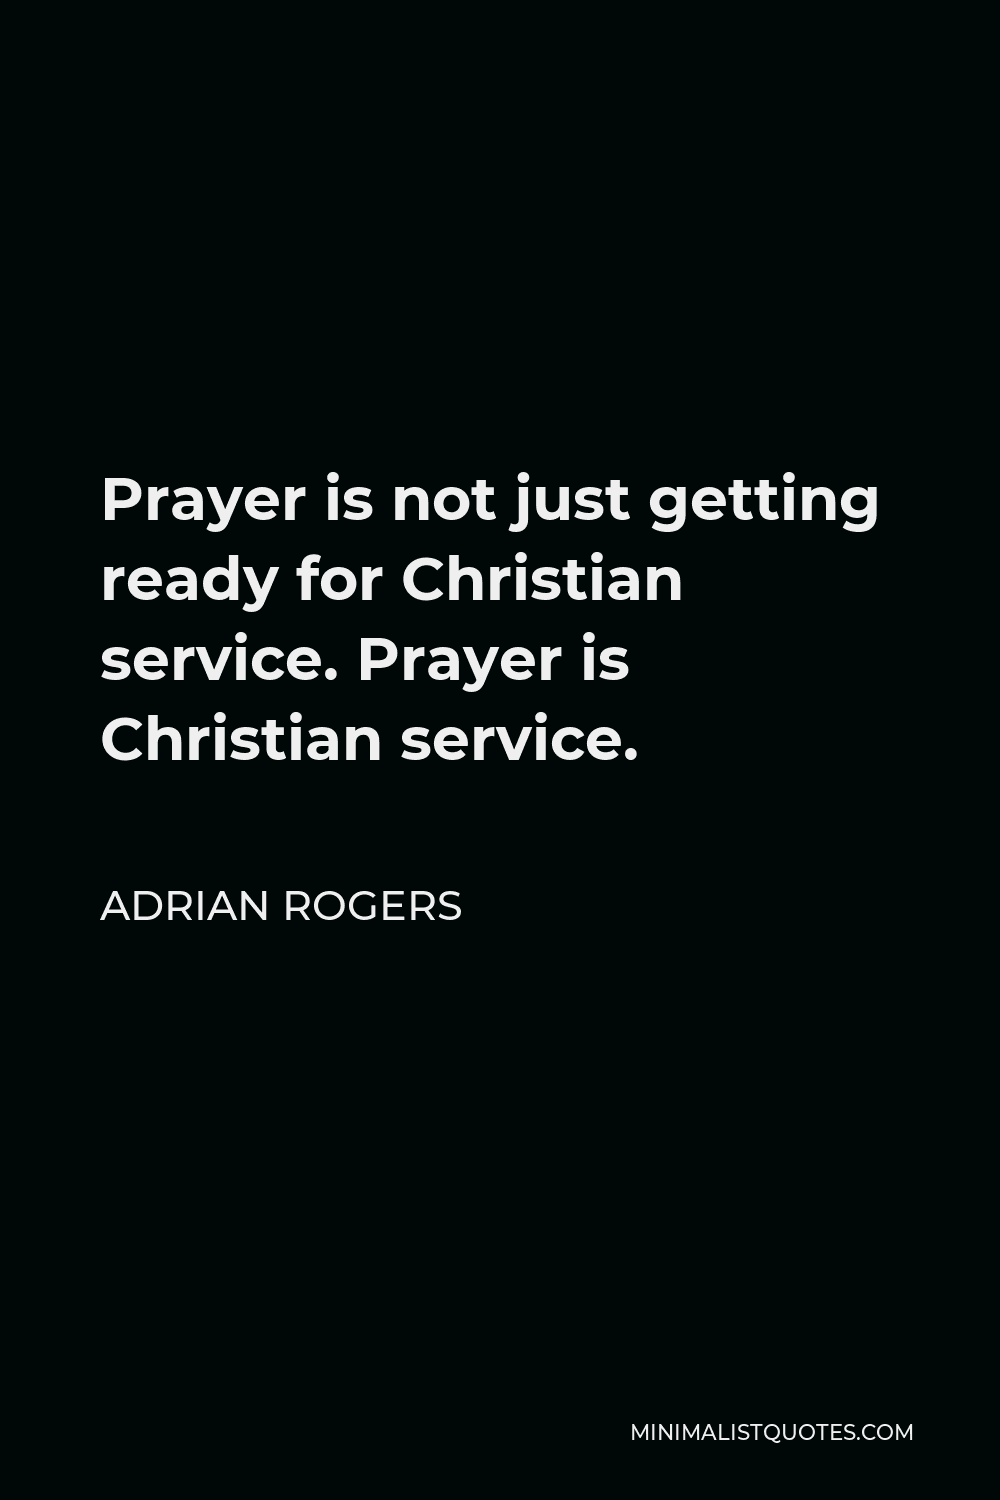 Adrian Rogers Quote - Prayer is not just getting ready for Christian service. Prayer is Christian service.